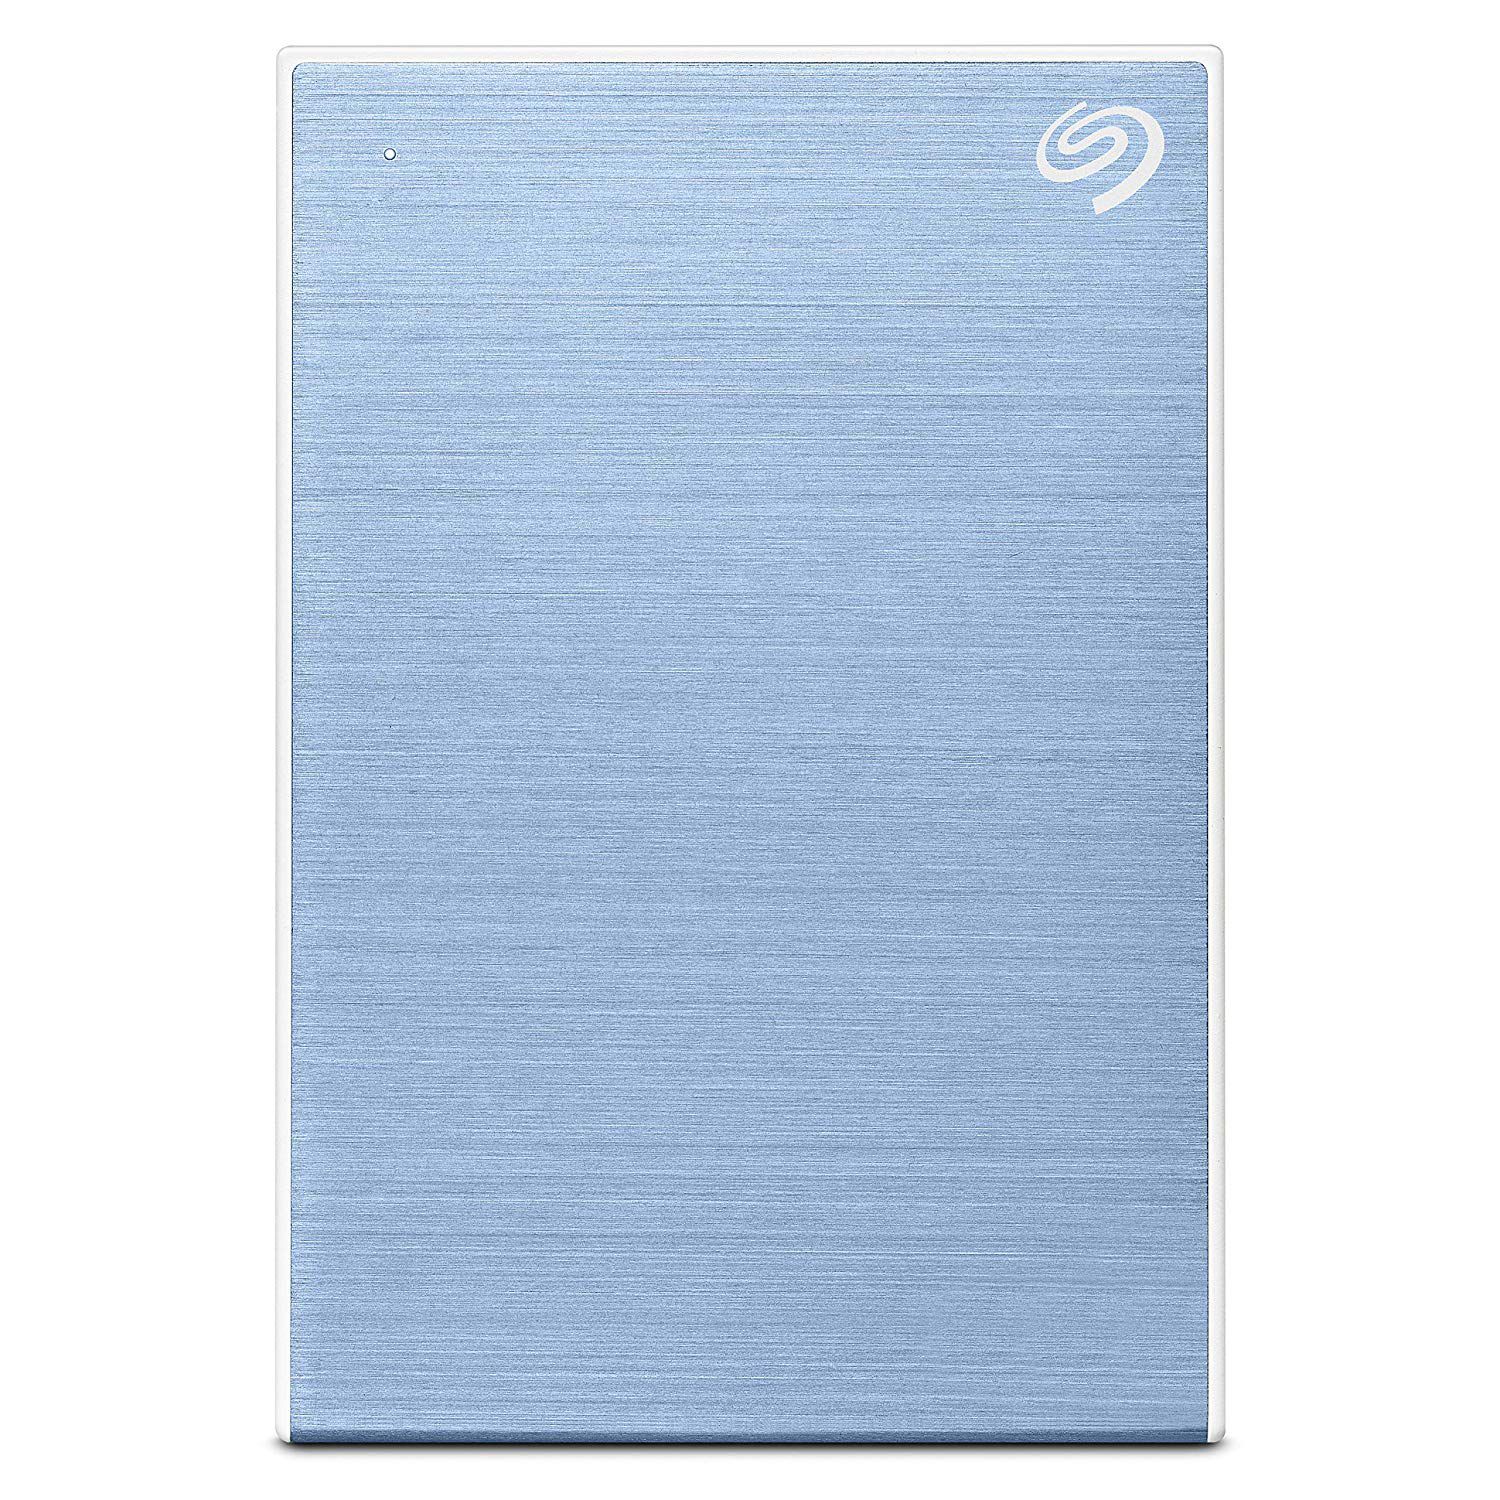     			Seagate Backup Plus Slim 2TB External Hard Drive Portable HDD-Light Blue USB 3.0 for PC Laptop and Mac, 1 year Mylio Create, 4 Months Adobe CC Photography, and 3-year Rescue Services (STHN2000402)